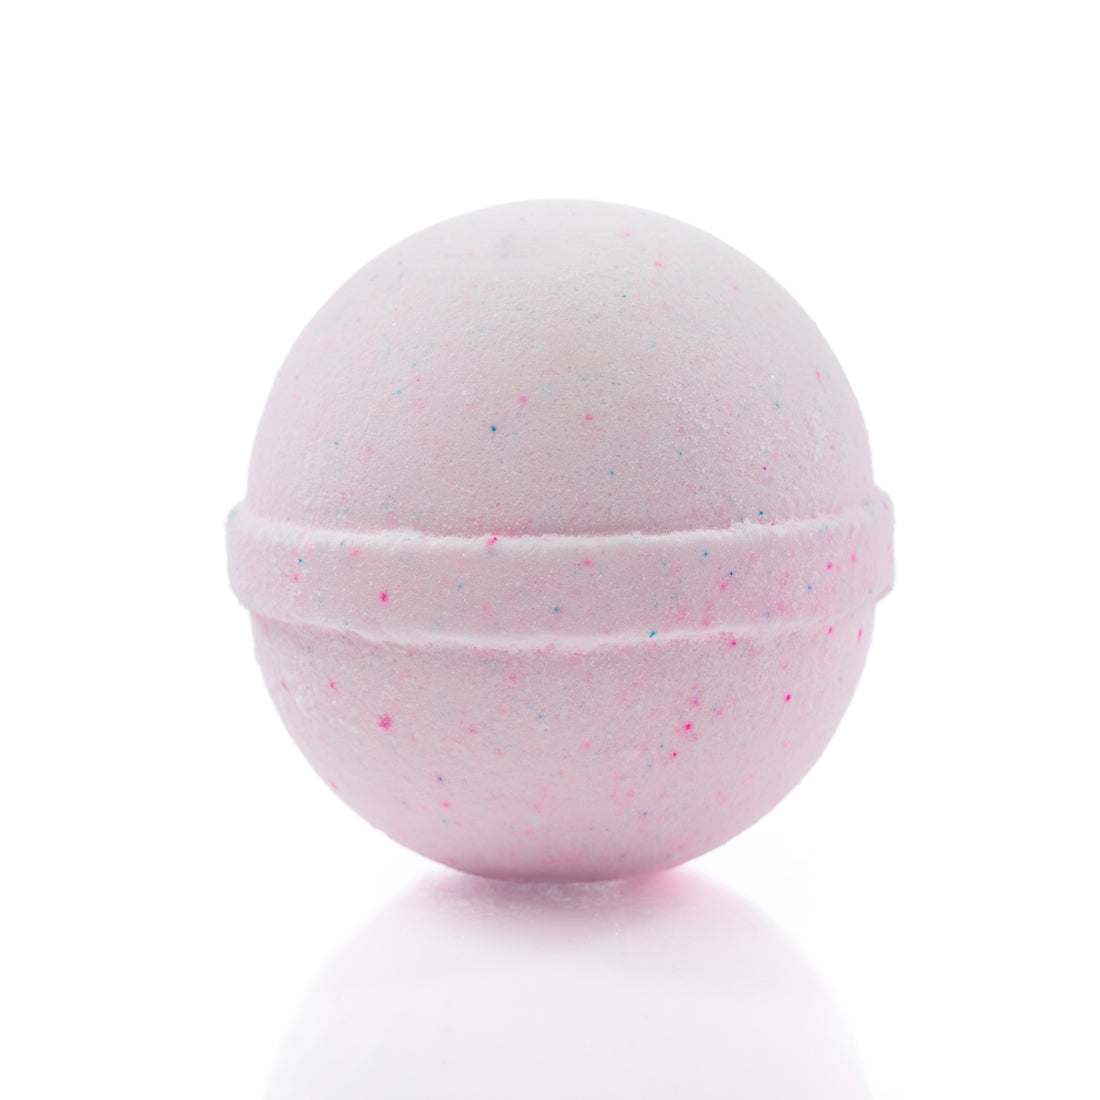 Bedtime Relaxation Bath Bomb